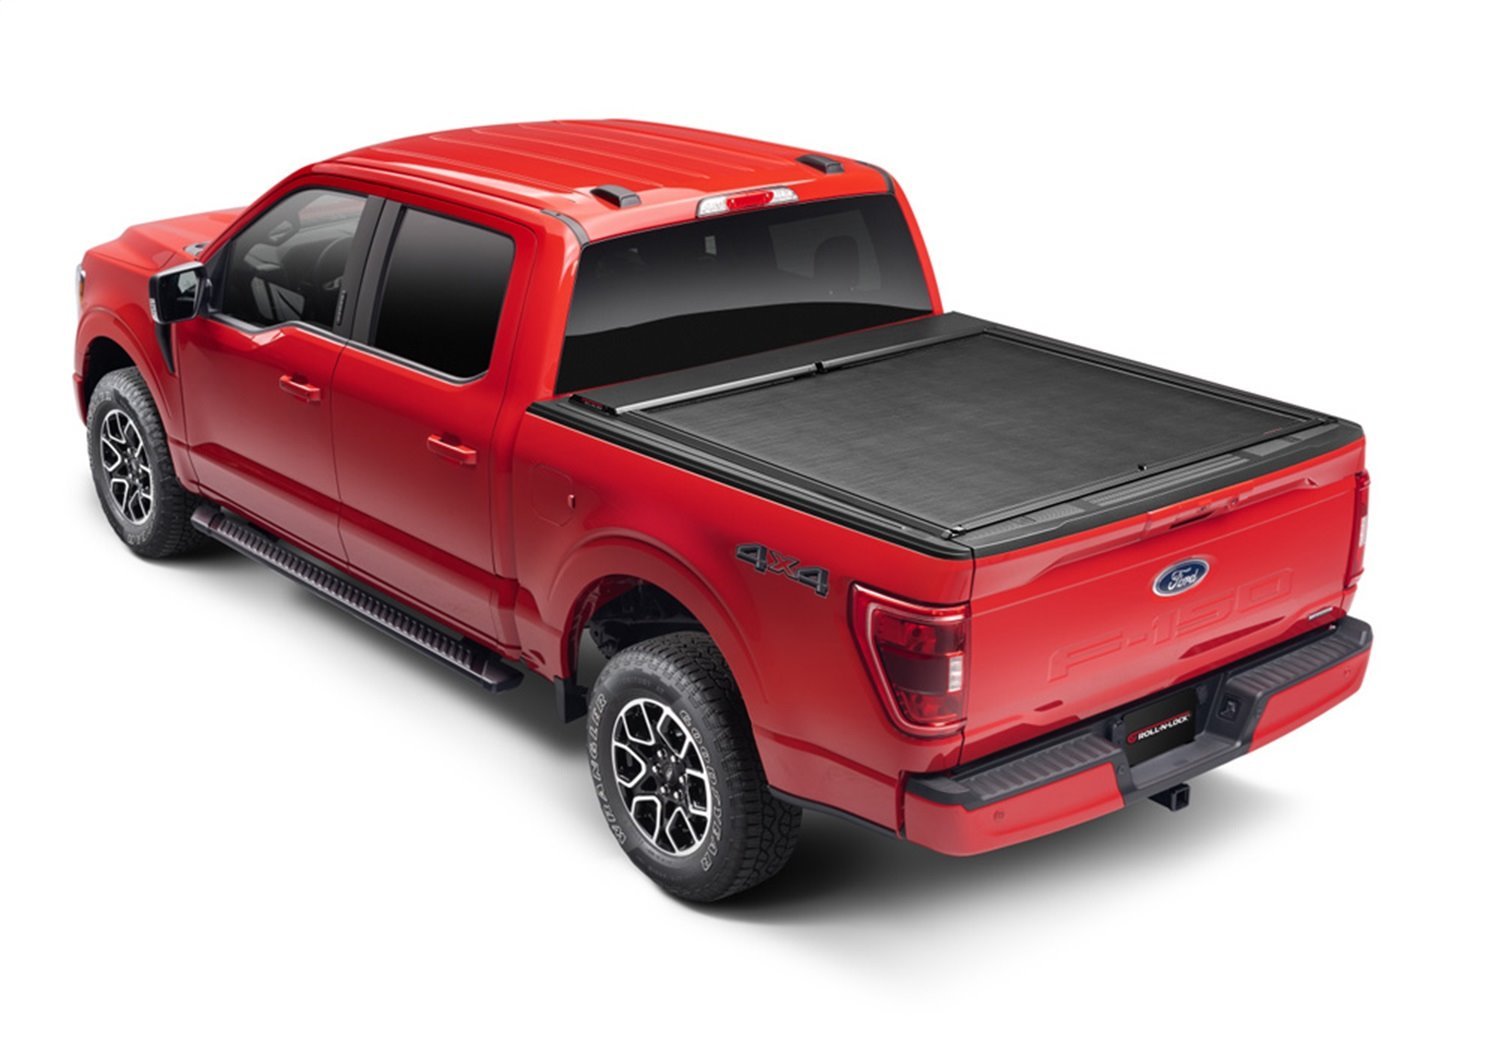 102M-XT M-Series XT Locking Retractable Truck Bed Cover for 2015-2020 Ford F-150 [6.7 ft. Bed]